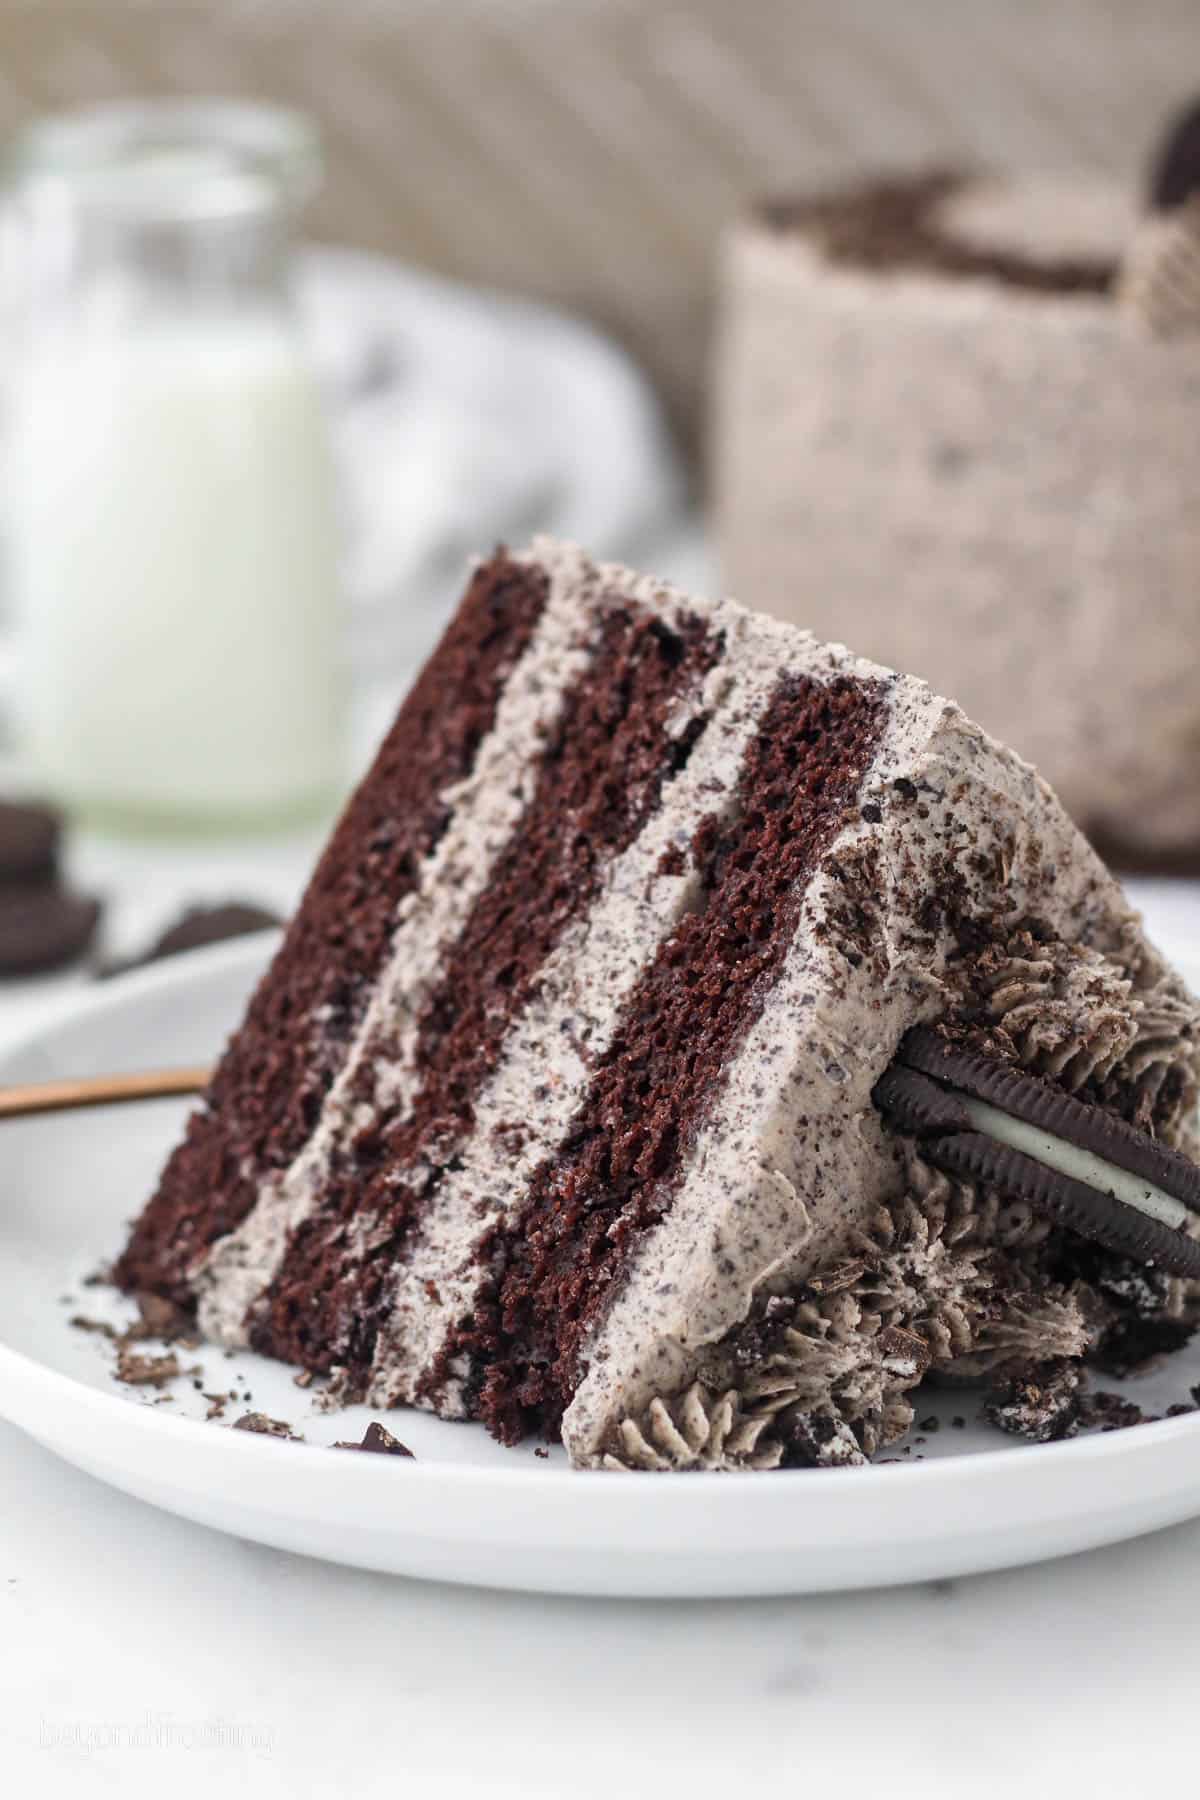 A slice of Oreo chocolate cake garnished with Oreos on a white pate.